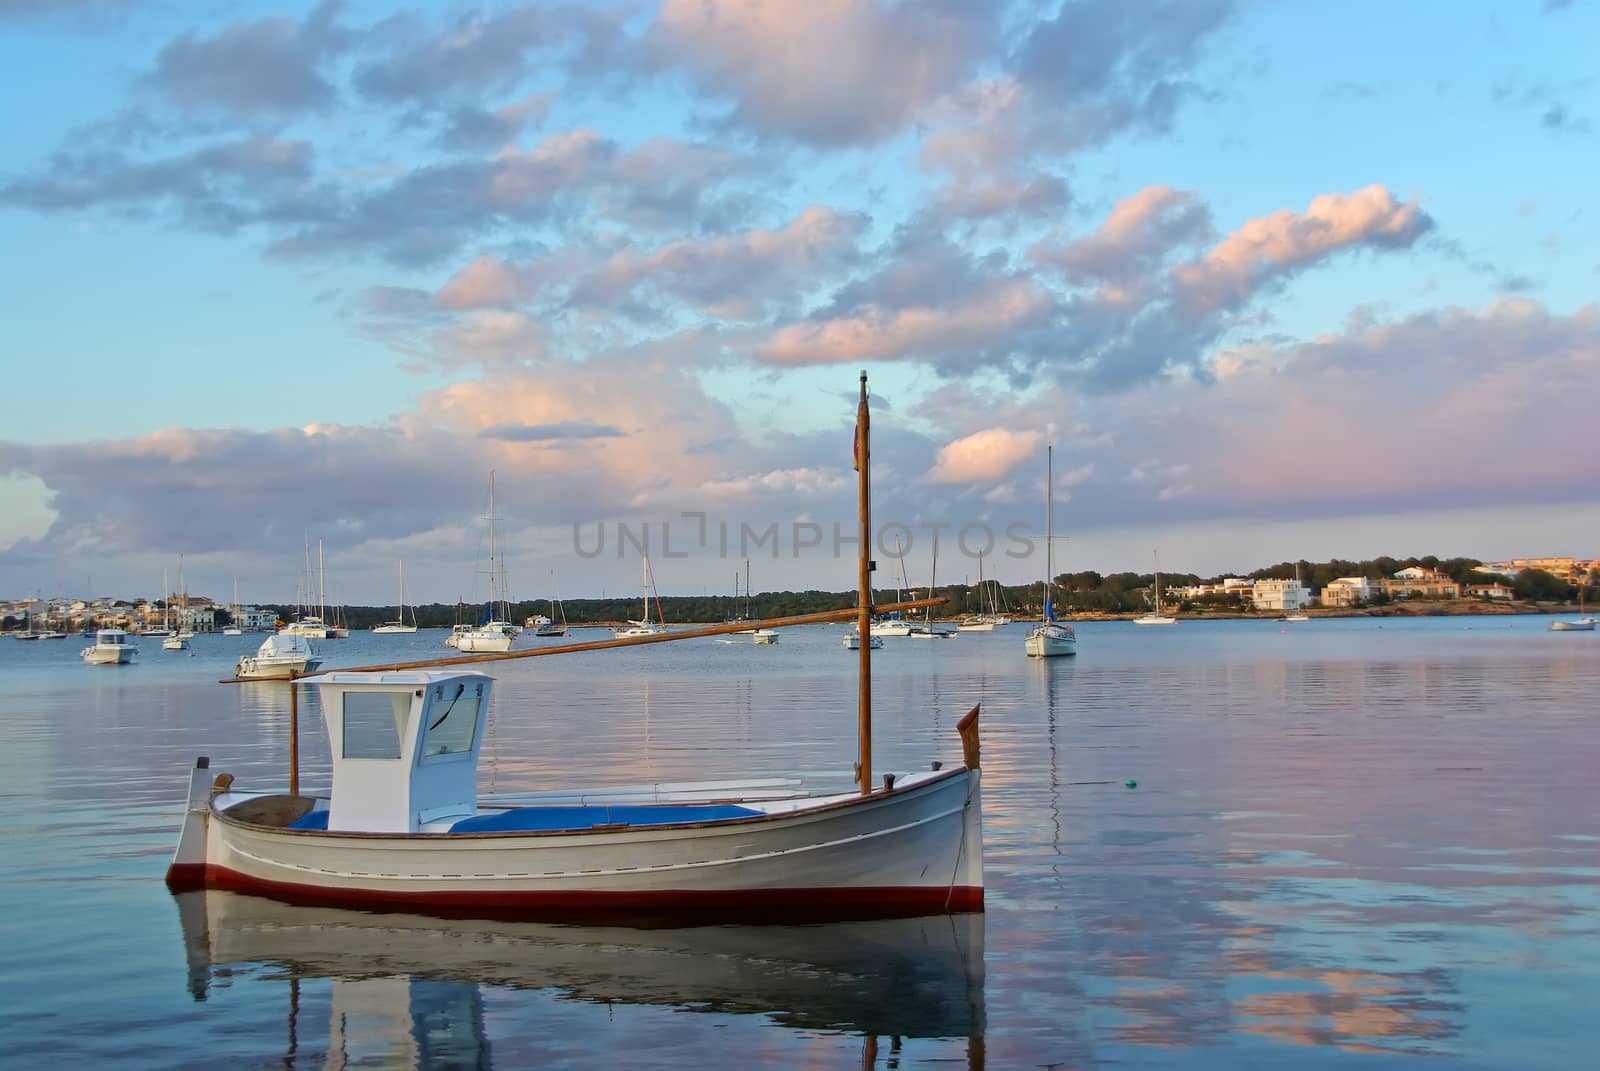 View of a boat in the Porto olom bay in Majorca (Spain) at sunset time